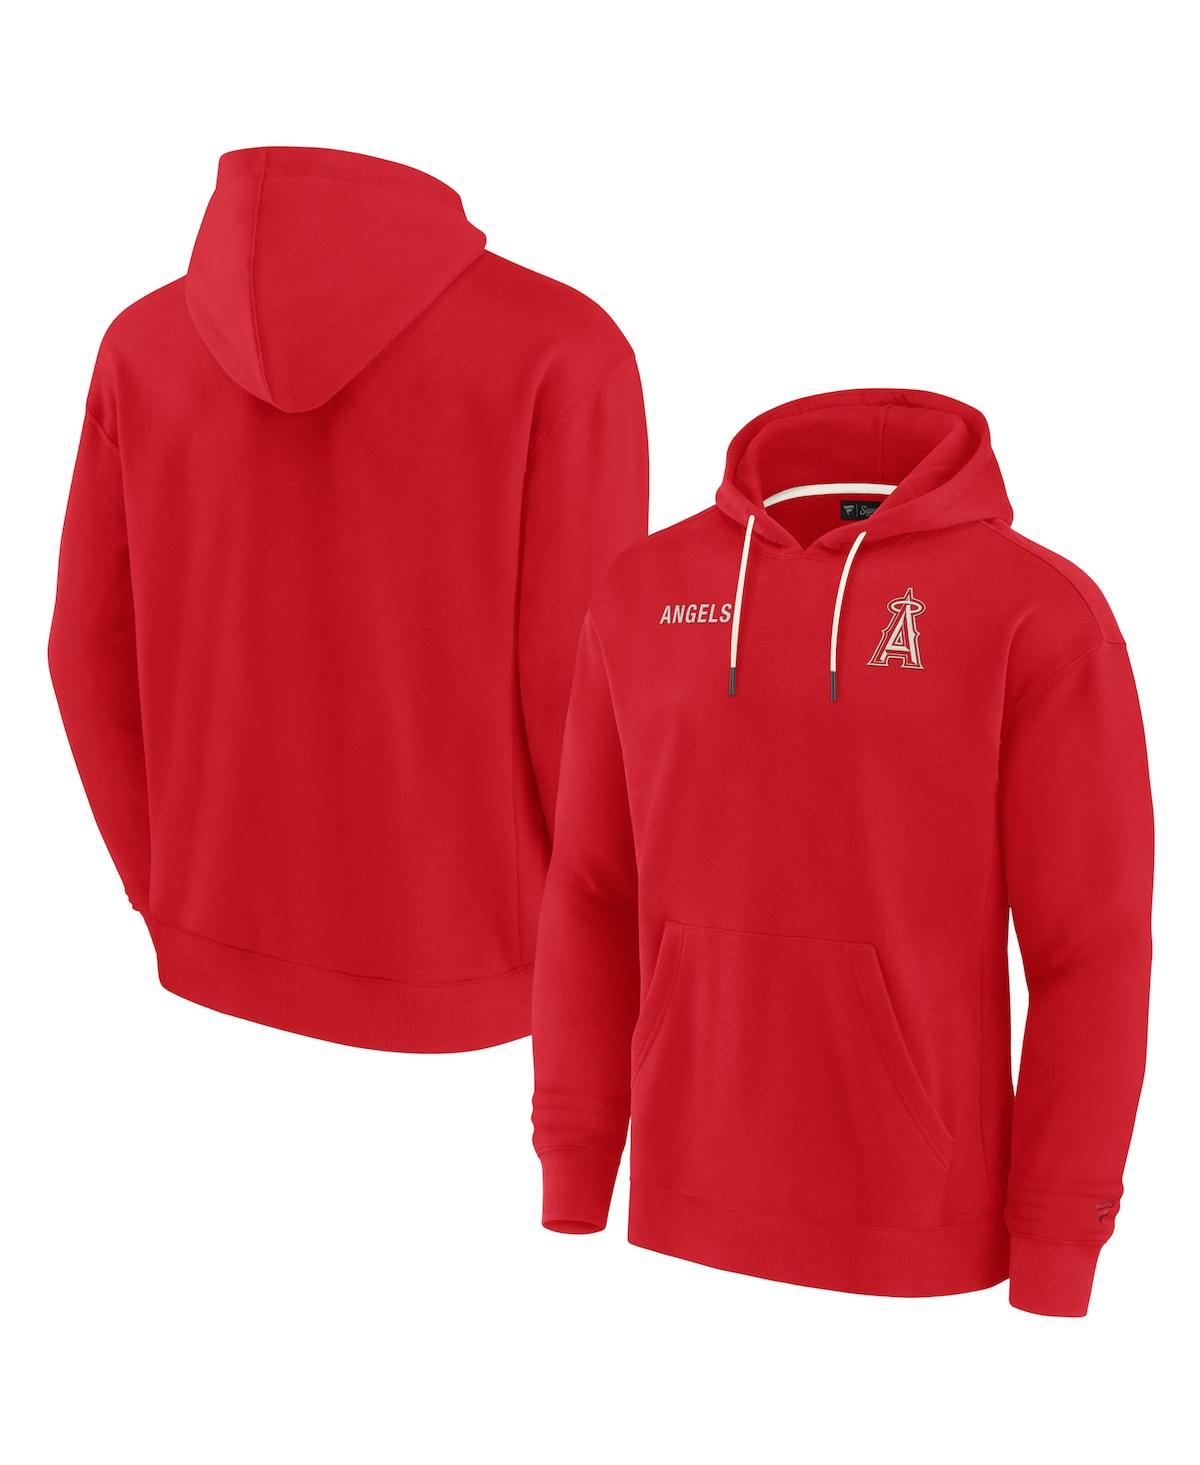 Fanatics Signature Men's And Women's  Red Los Angeles Angels Super Soft Fleece Pullover Hoodie